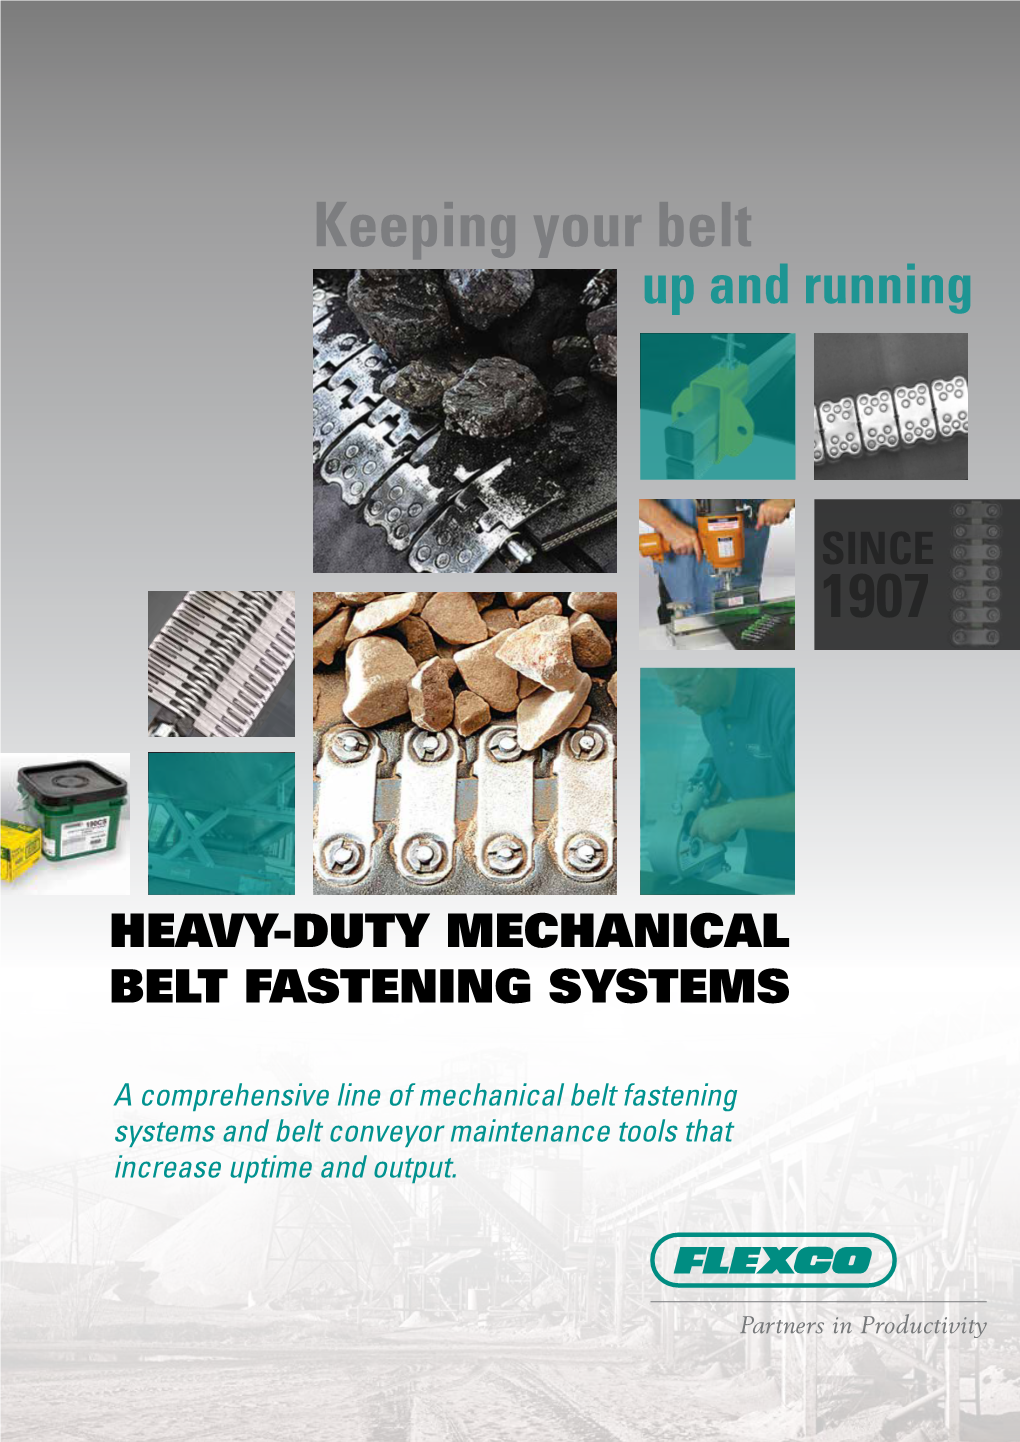 Fasteners Set the Industry's Highest Standards for Design, Ease of Use, and Reliability